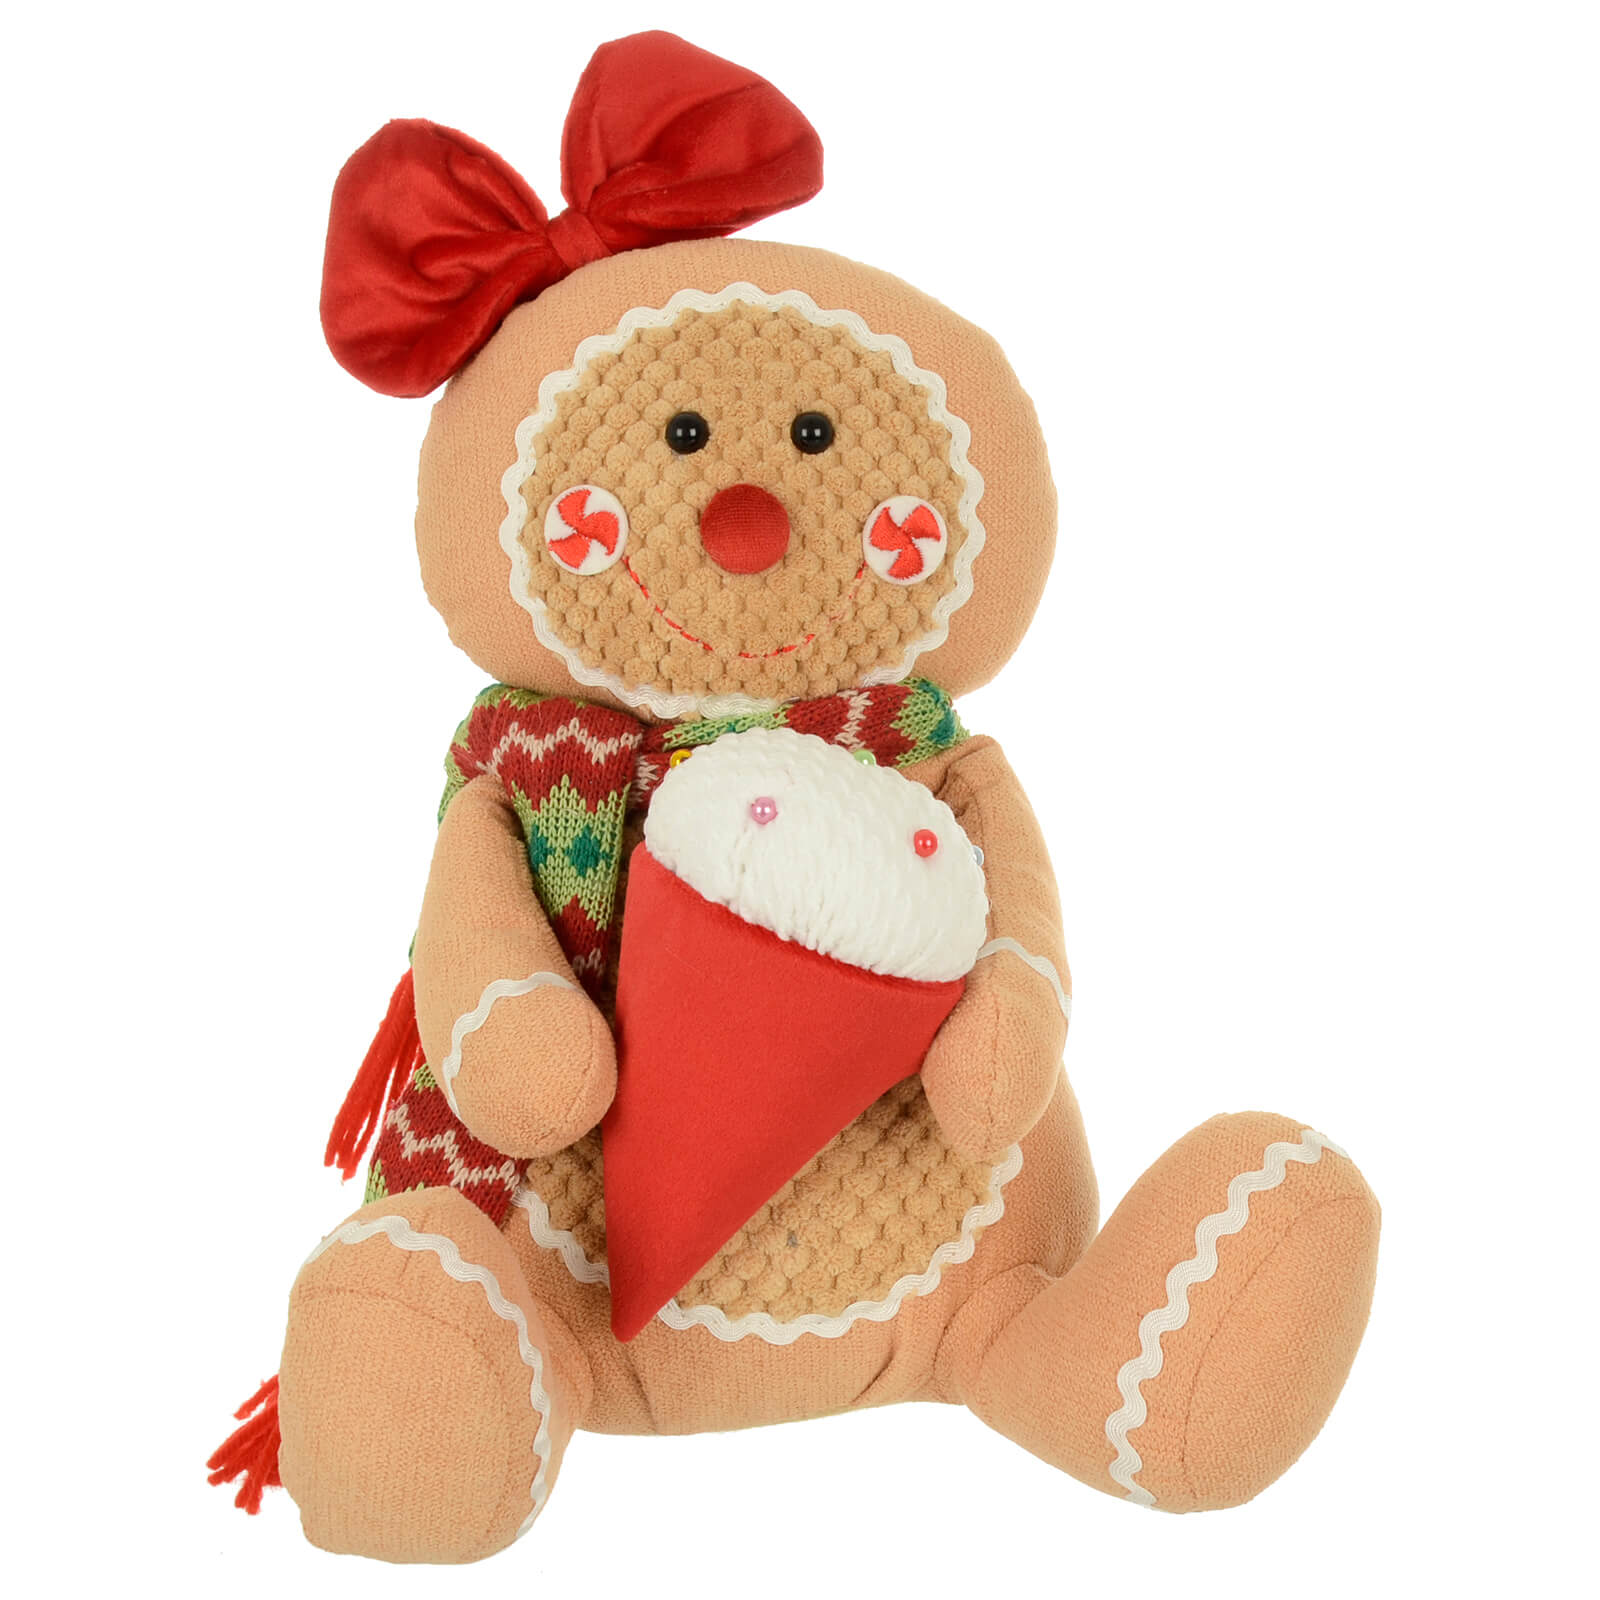 Gingerbread lady 33cm figure with ice cream cone